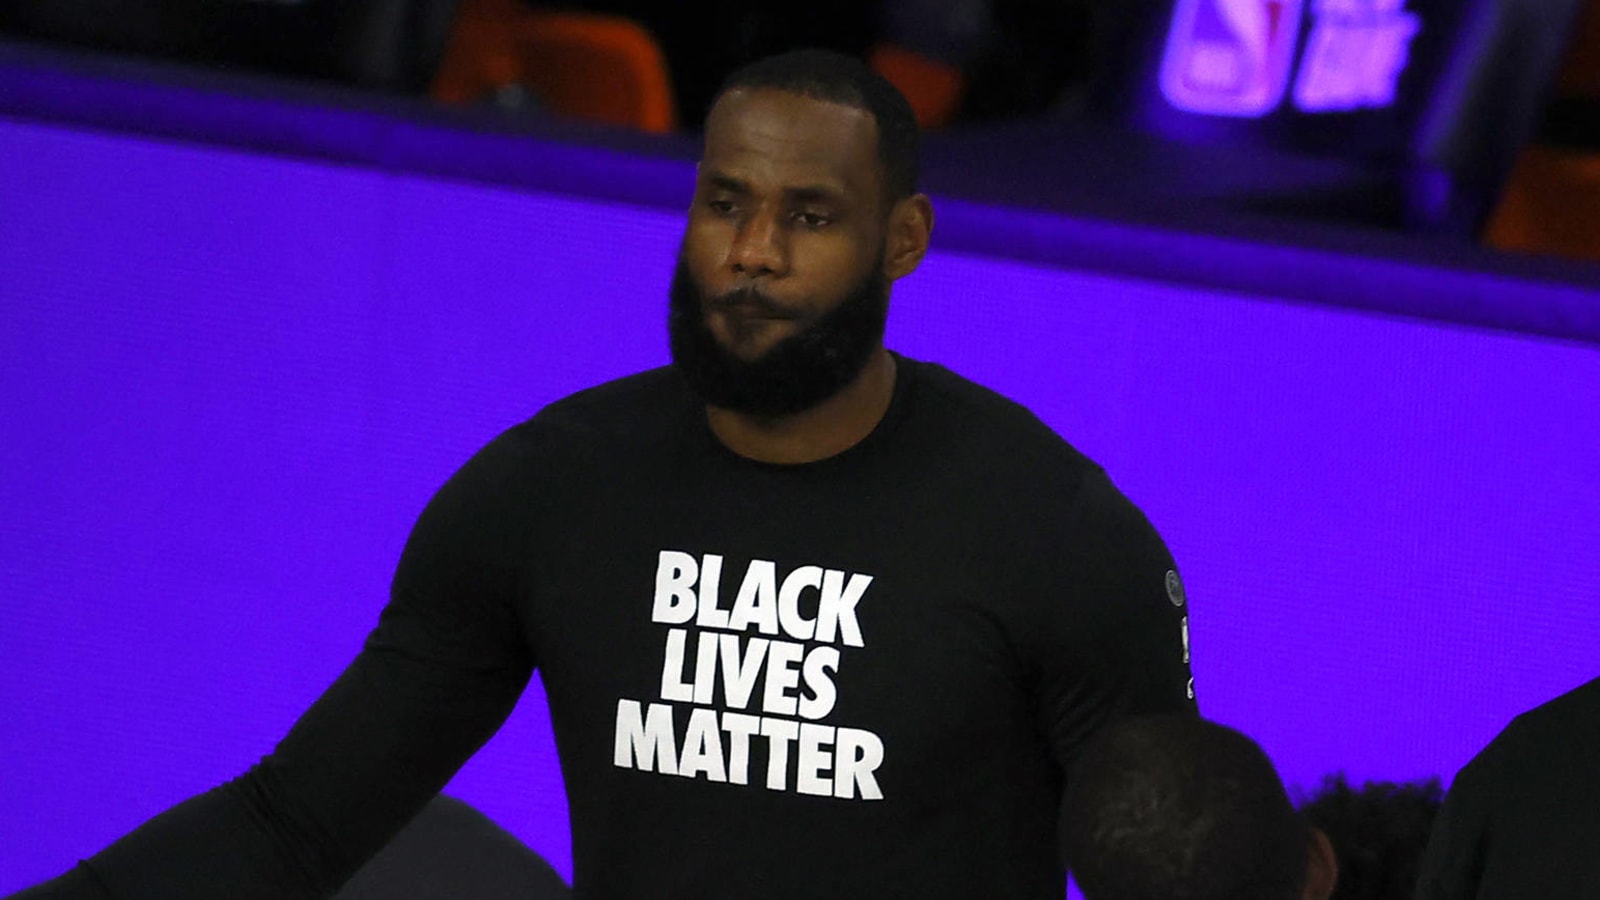 LeBron James speaks out about Jacob Blake shooting